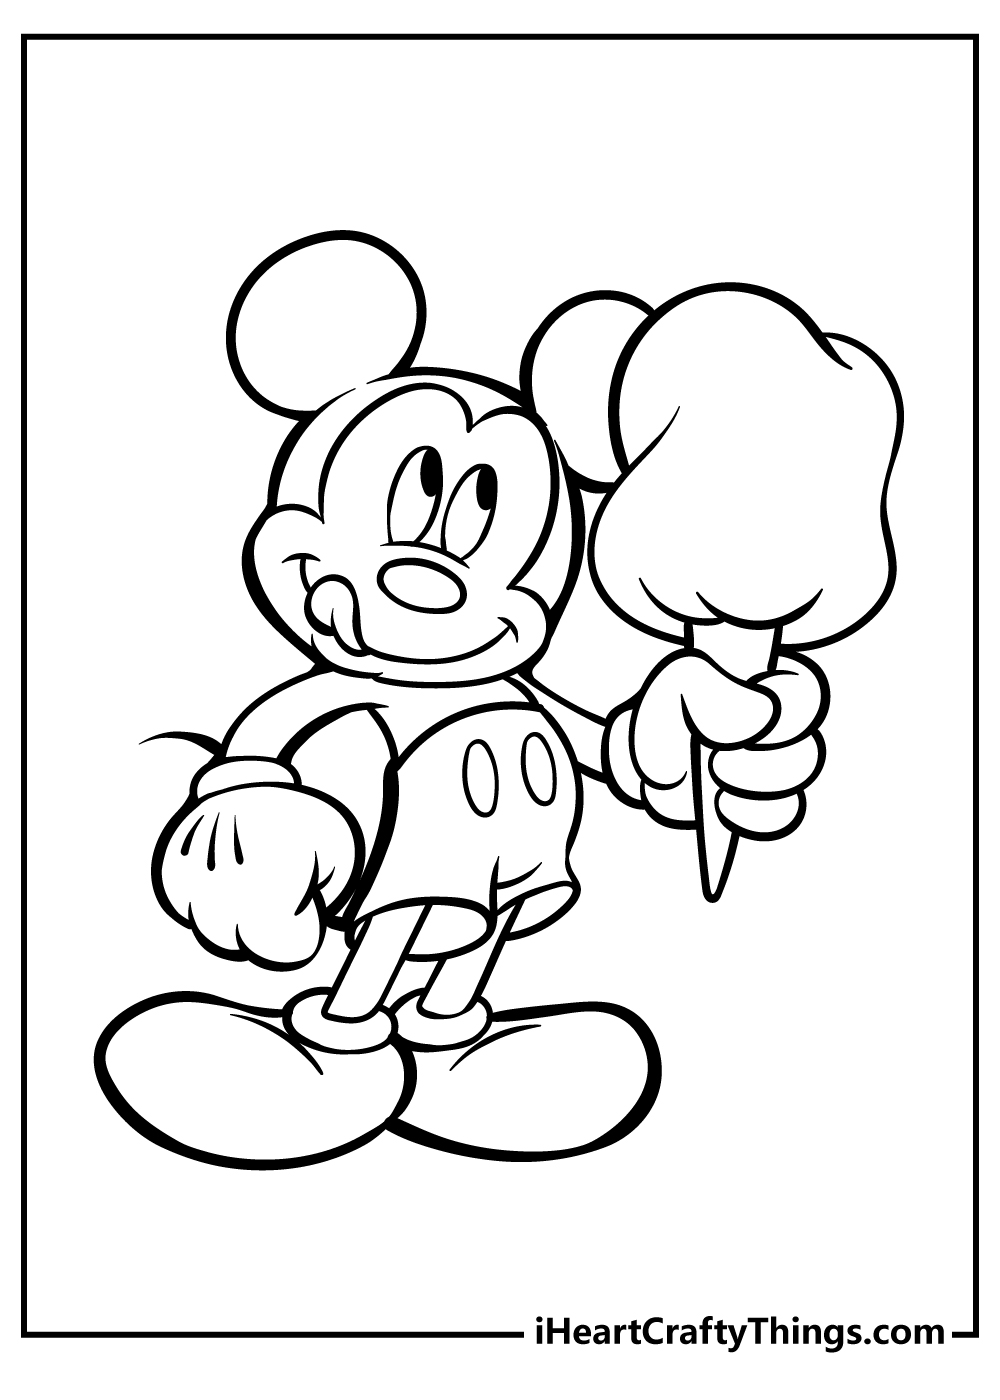 Cool Mickey Mouse Coloring Pages Printables 5